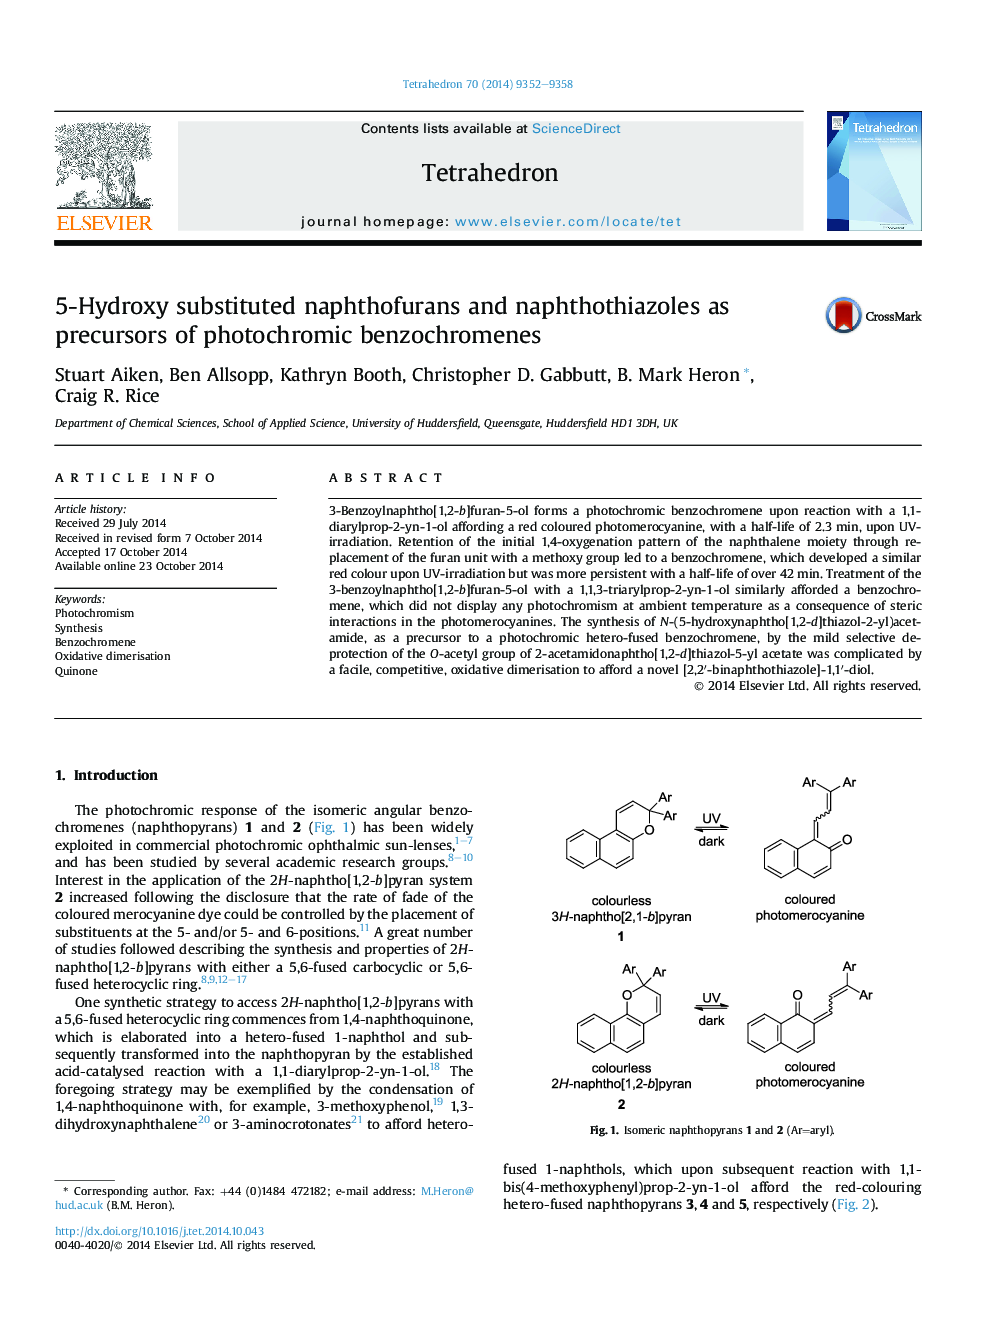 5-Hydroxy substituted naphthofurans and naphthothiazoles as precursors of photochromic benzochromenes